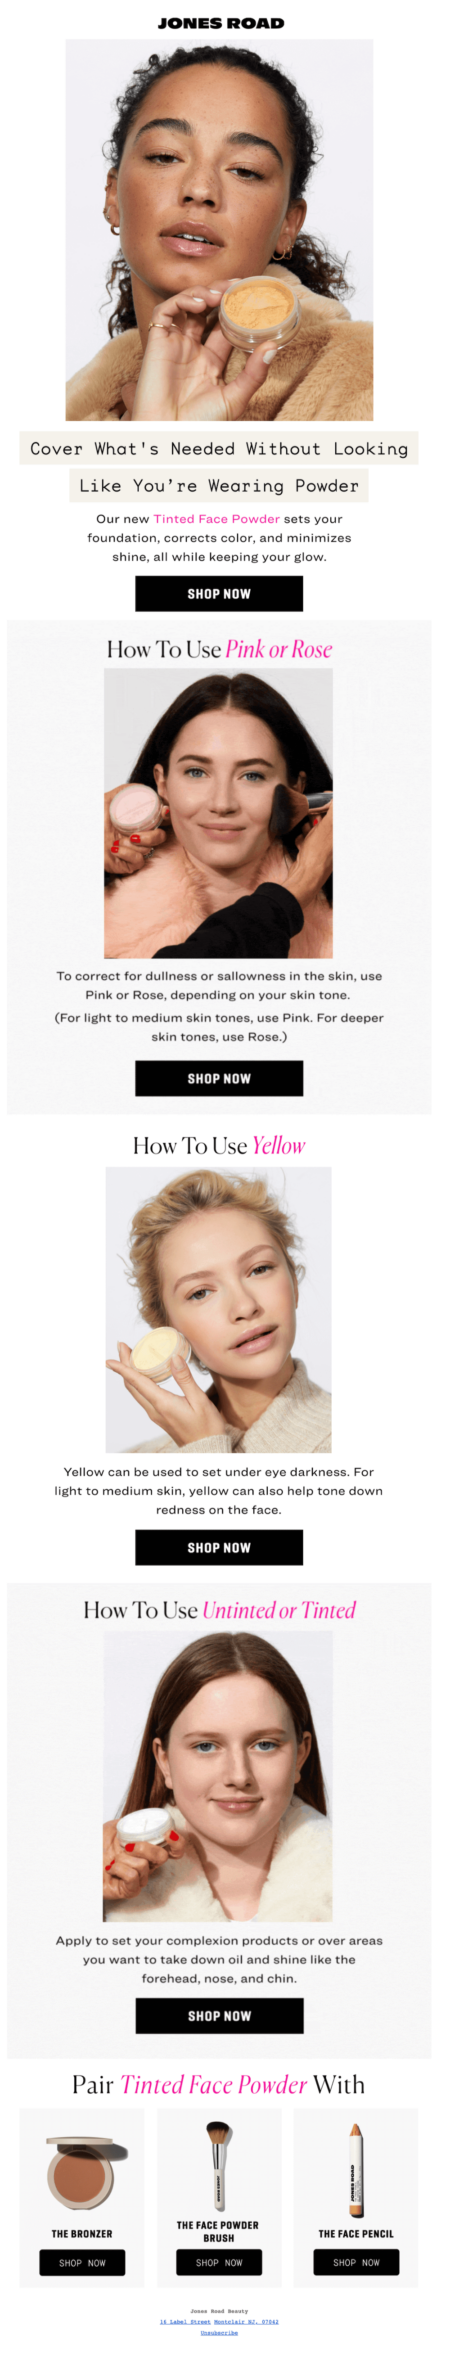 Image shows an educational email from Jones Road Beauty offering detailed instruction on how to use particular shades of a tinted face powder product, as well as links to complementary products.